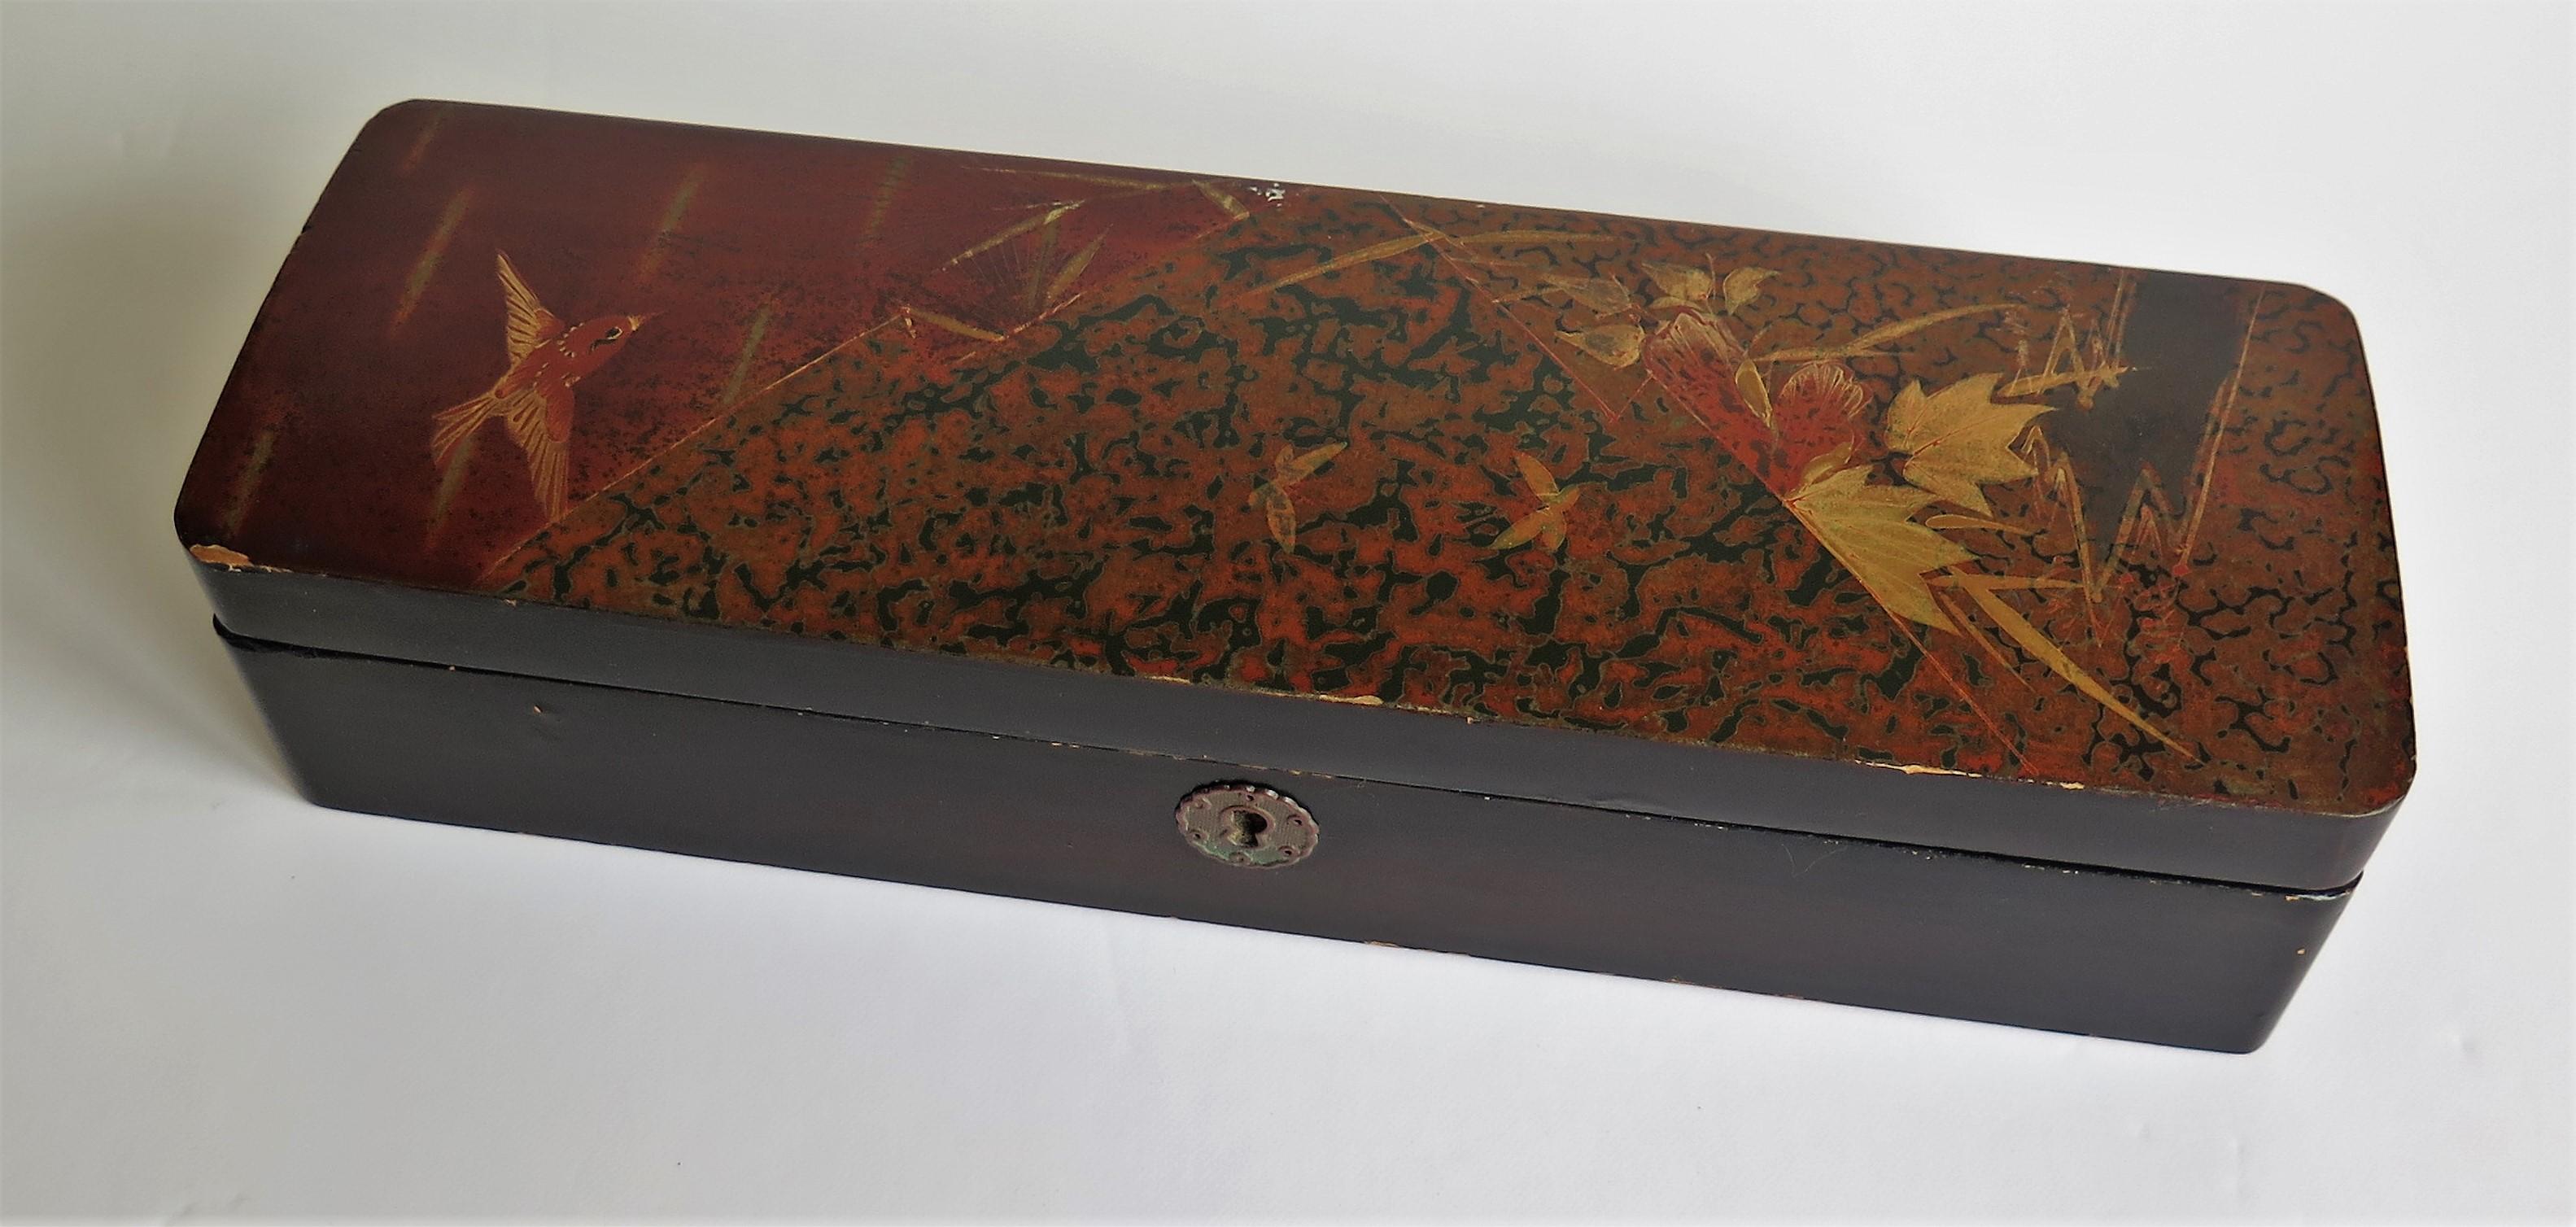 Paper Japanese Laquered Box with Hinged Lid and Lock, Taisho Period Circa 1920